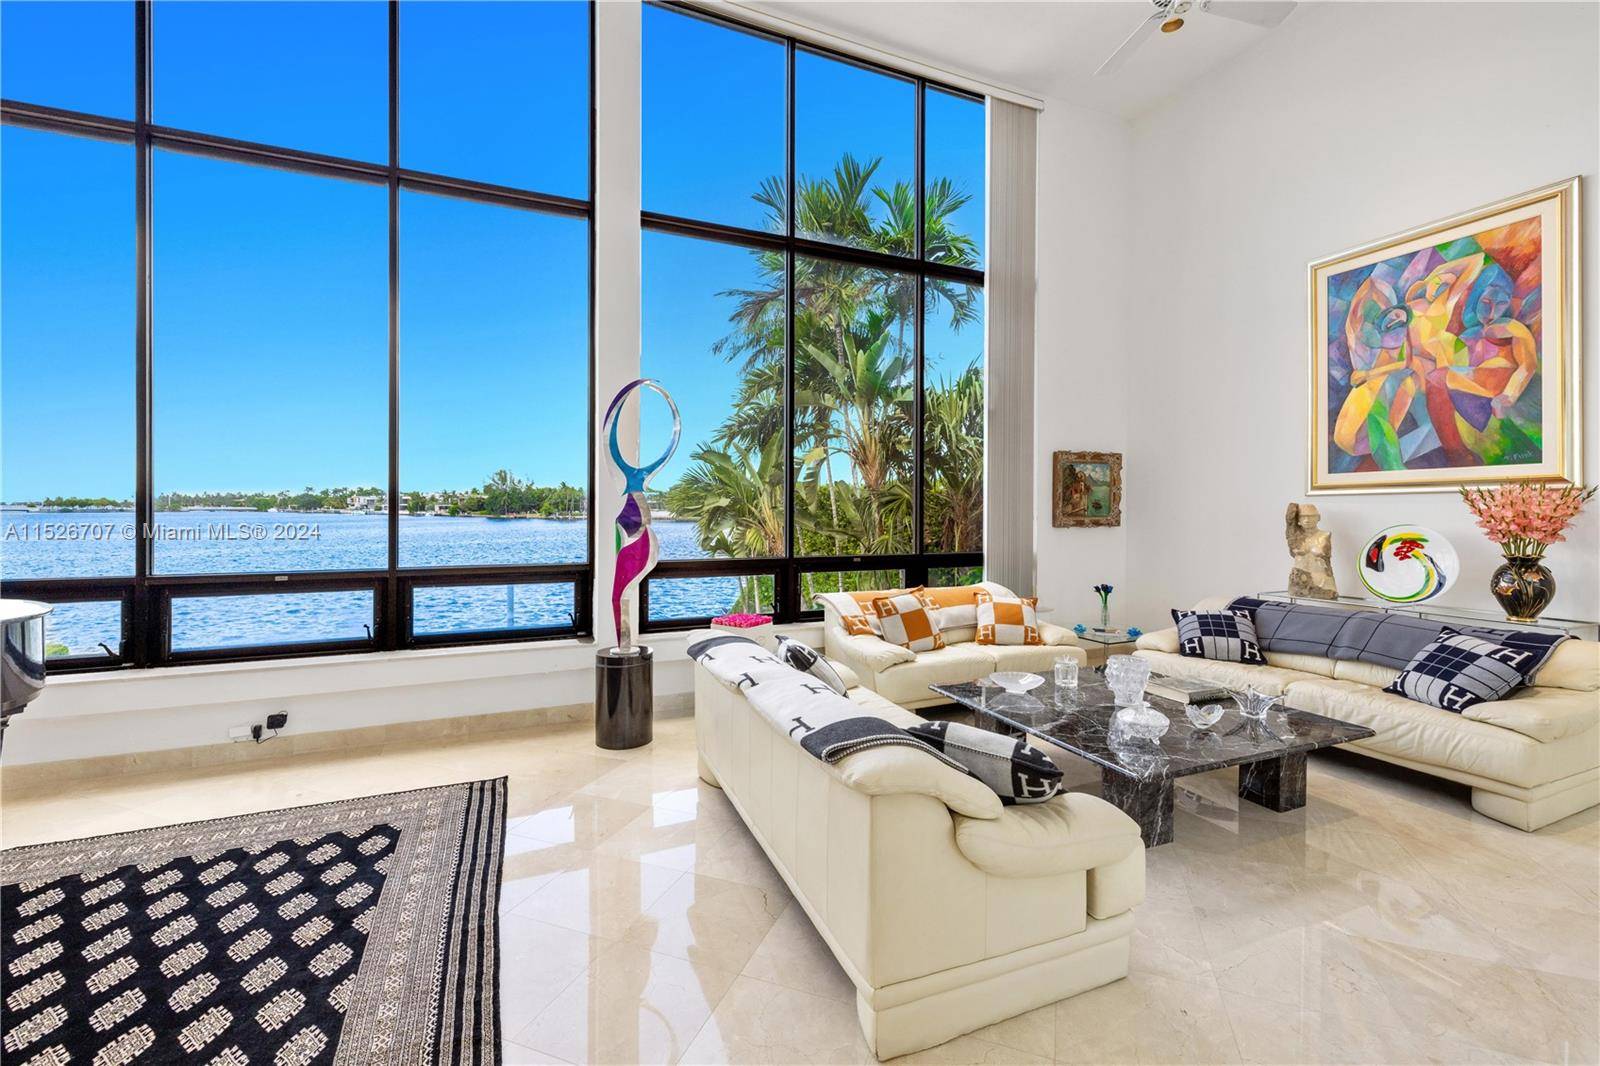 Imagine waking up to panoramic WIDE BAY VIEWS from your double height living room on prestigious SECURED Hibiscus Island.